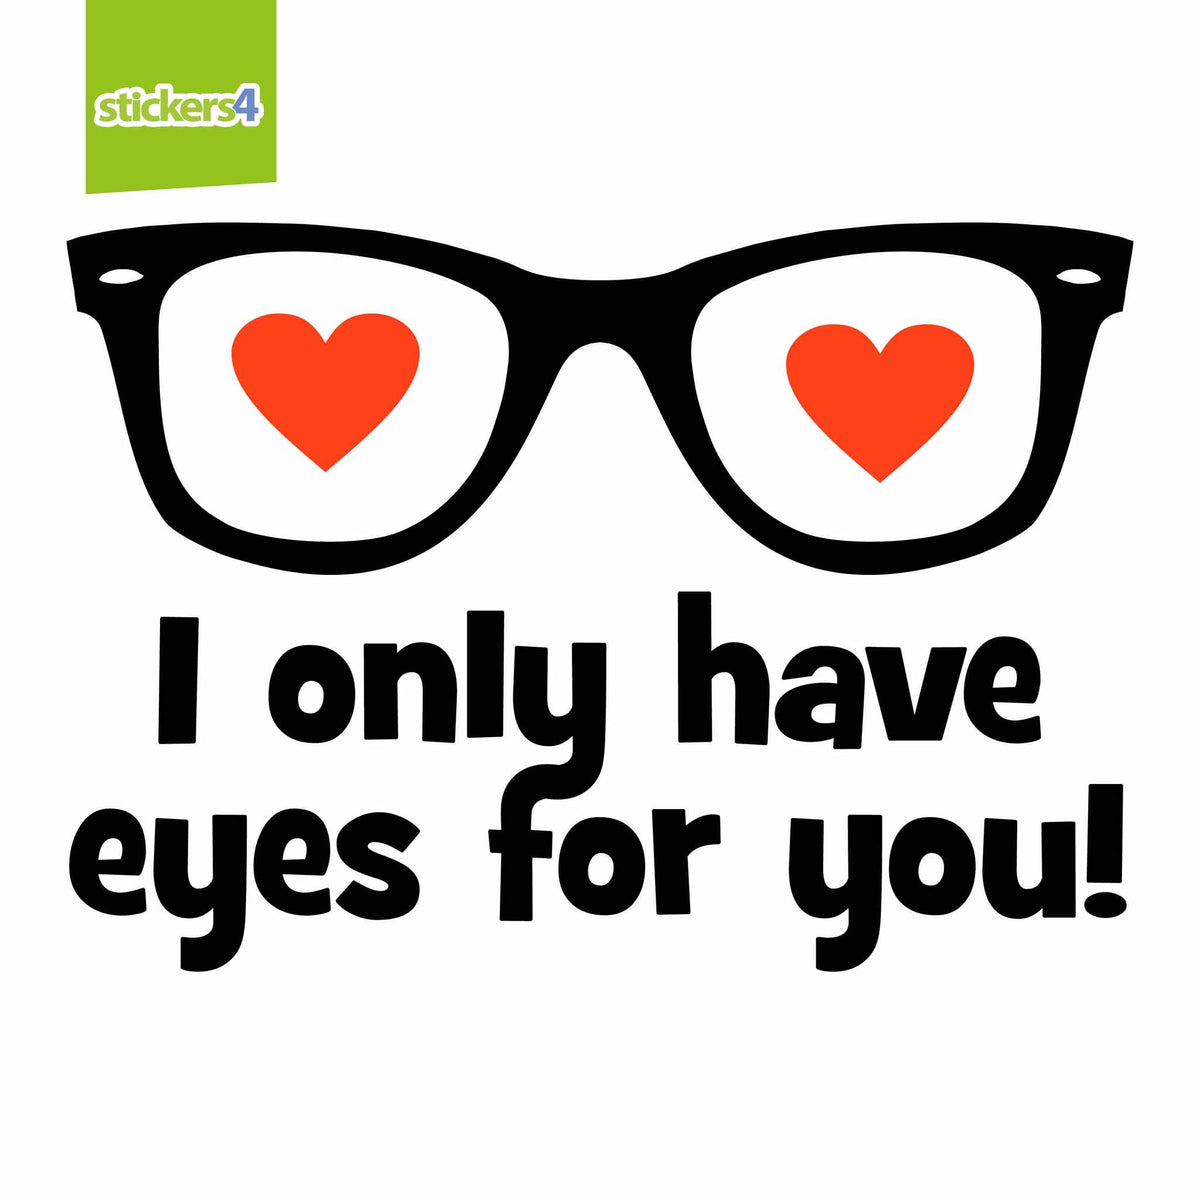 I Only Have Eyes For You (Black Text) Window Cling Sticker